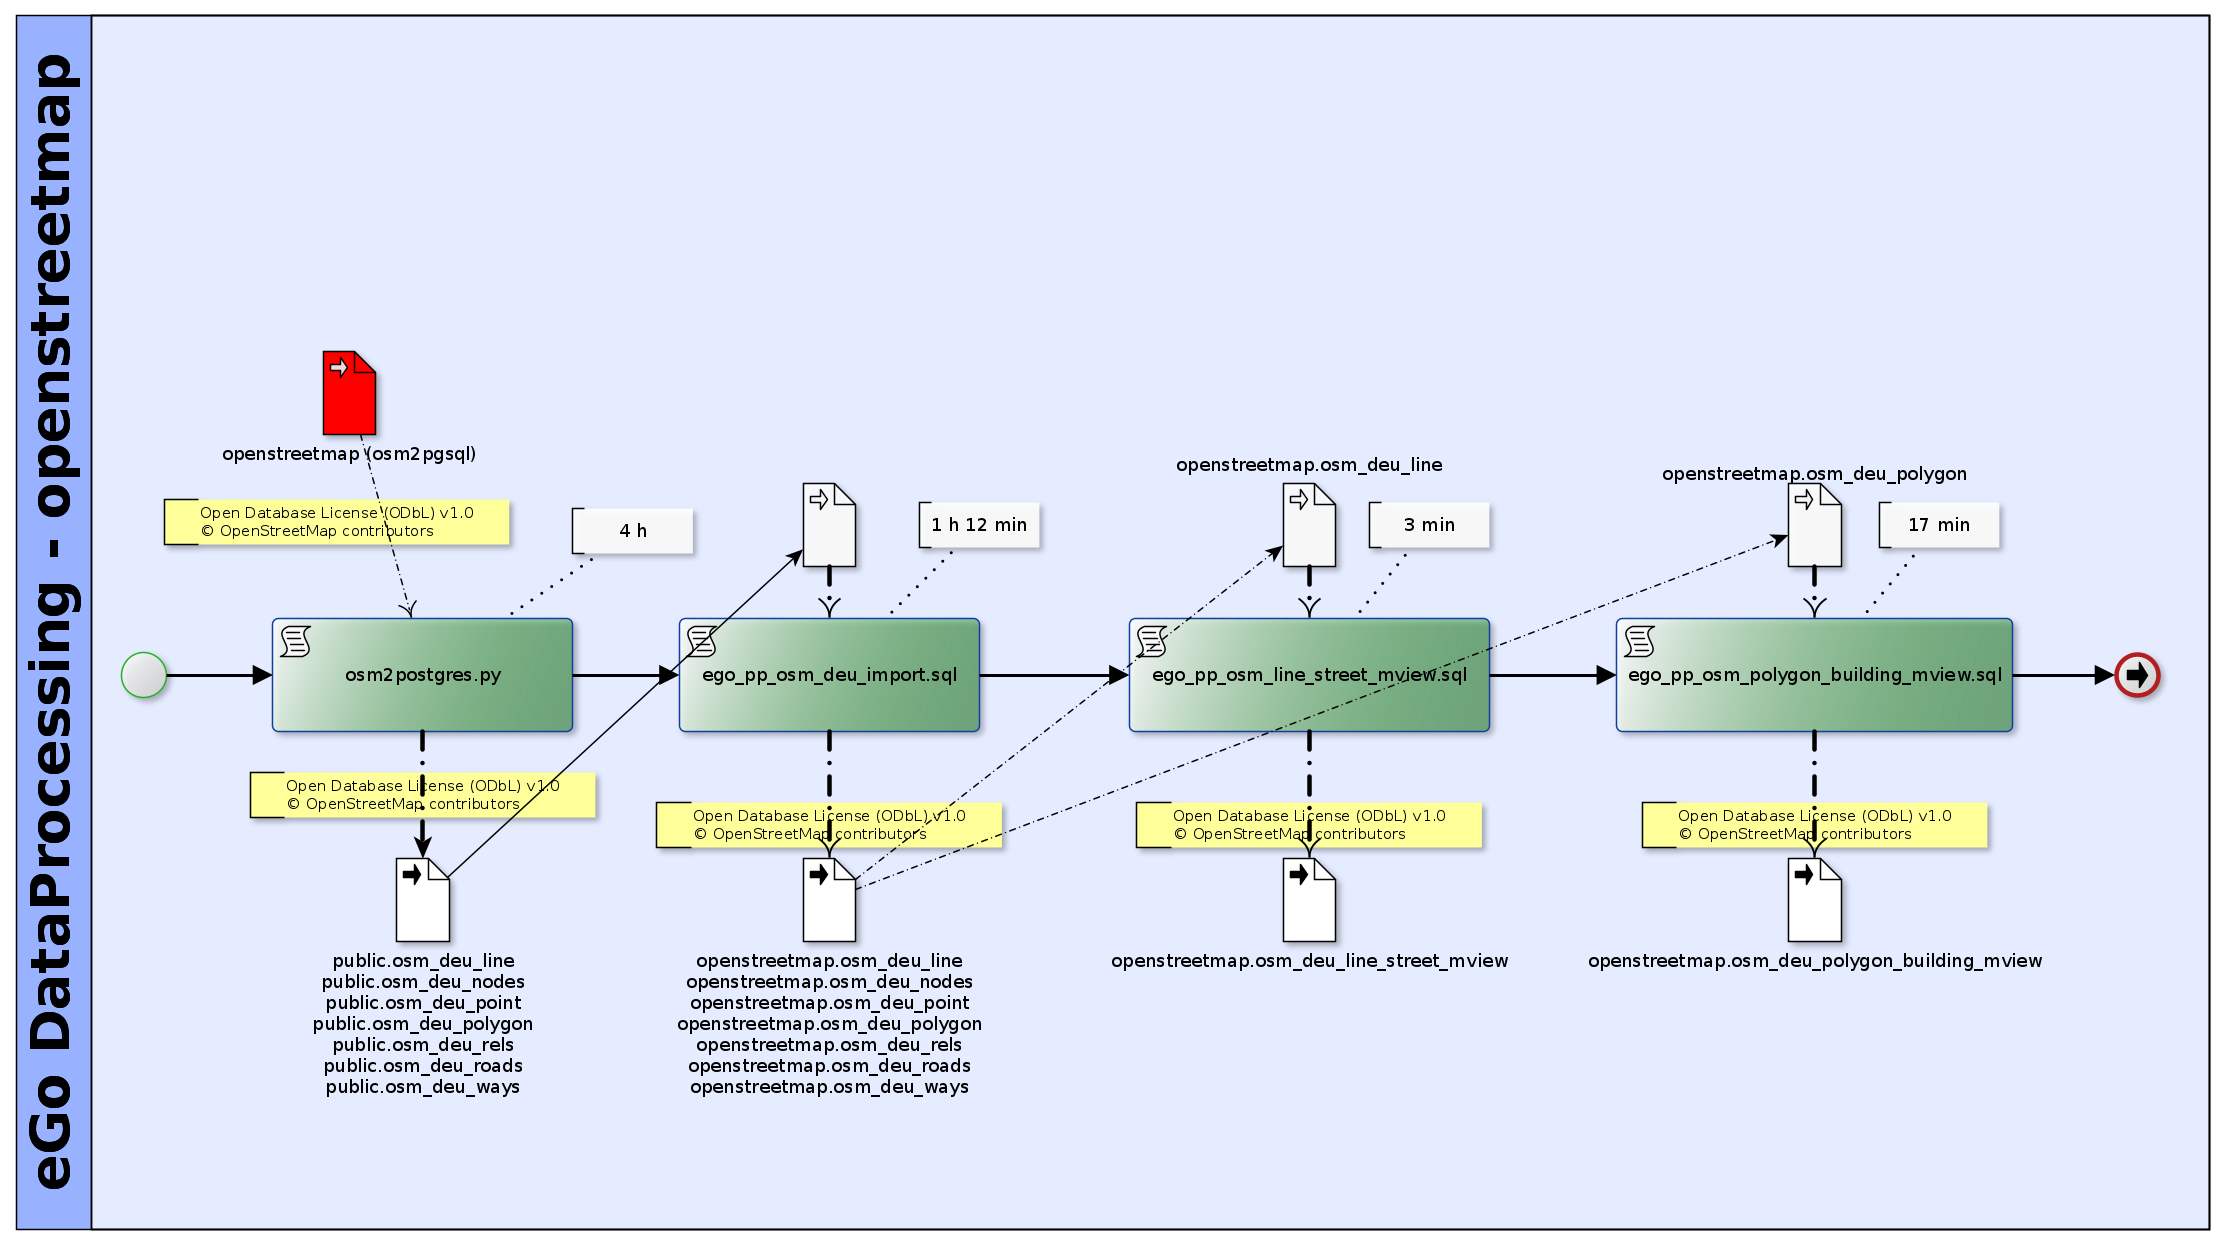 _images/ego_dp-pre_bpmn_section_openstreetmap.png